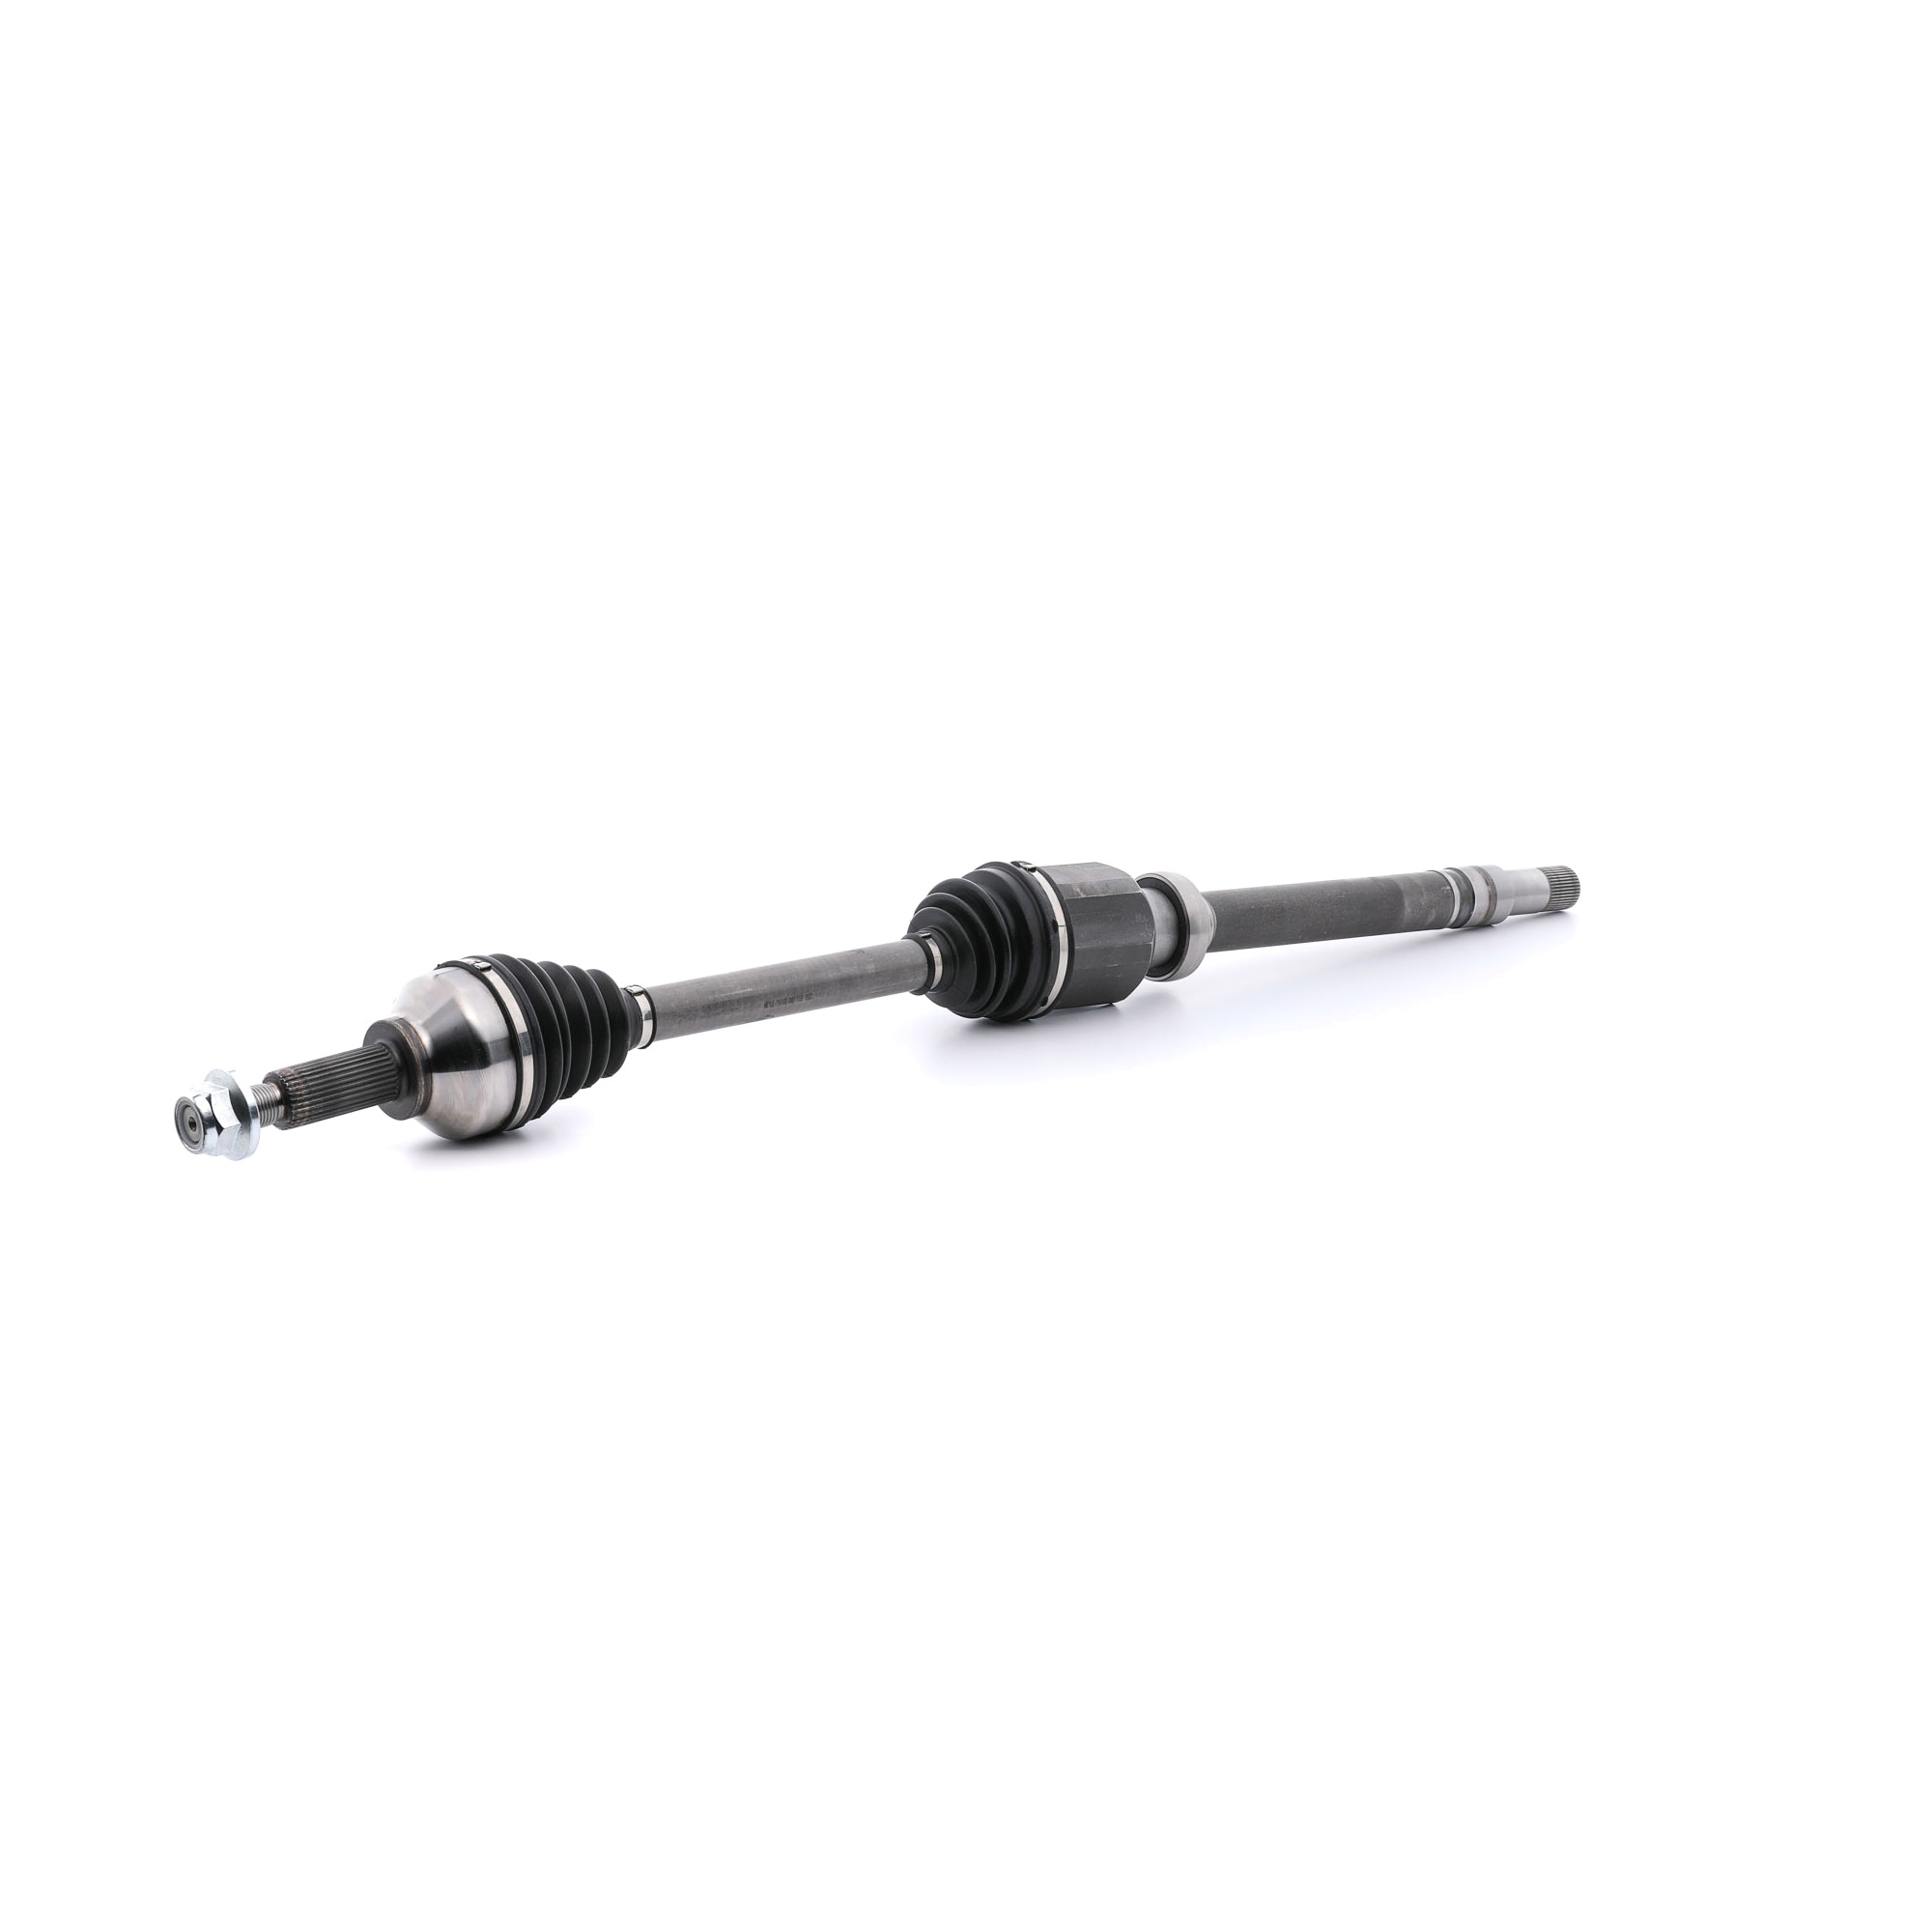 Original MEYLE MDS0194 Axle shaft 714 498 0063 for FORD TRANSIT